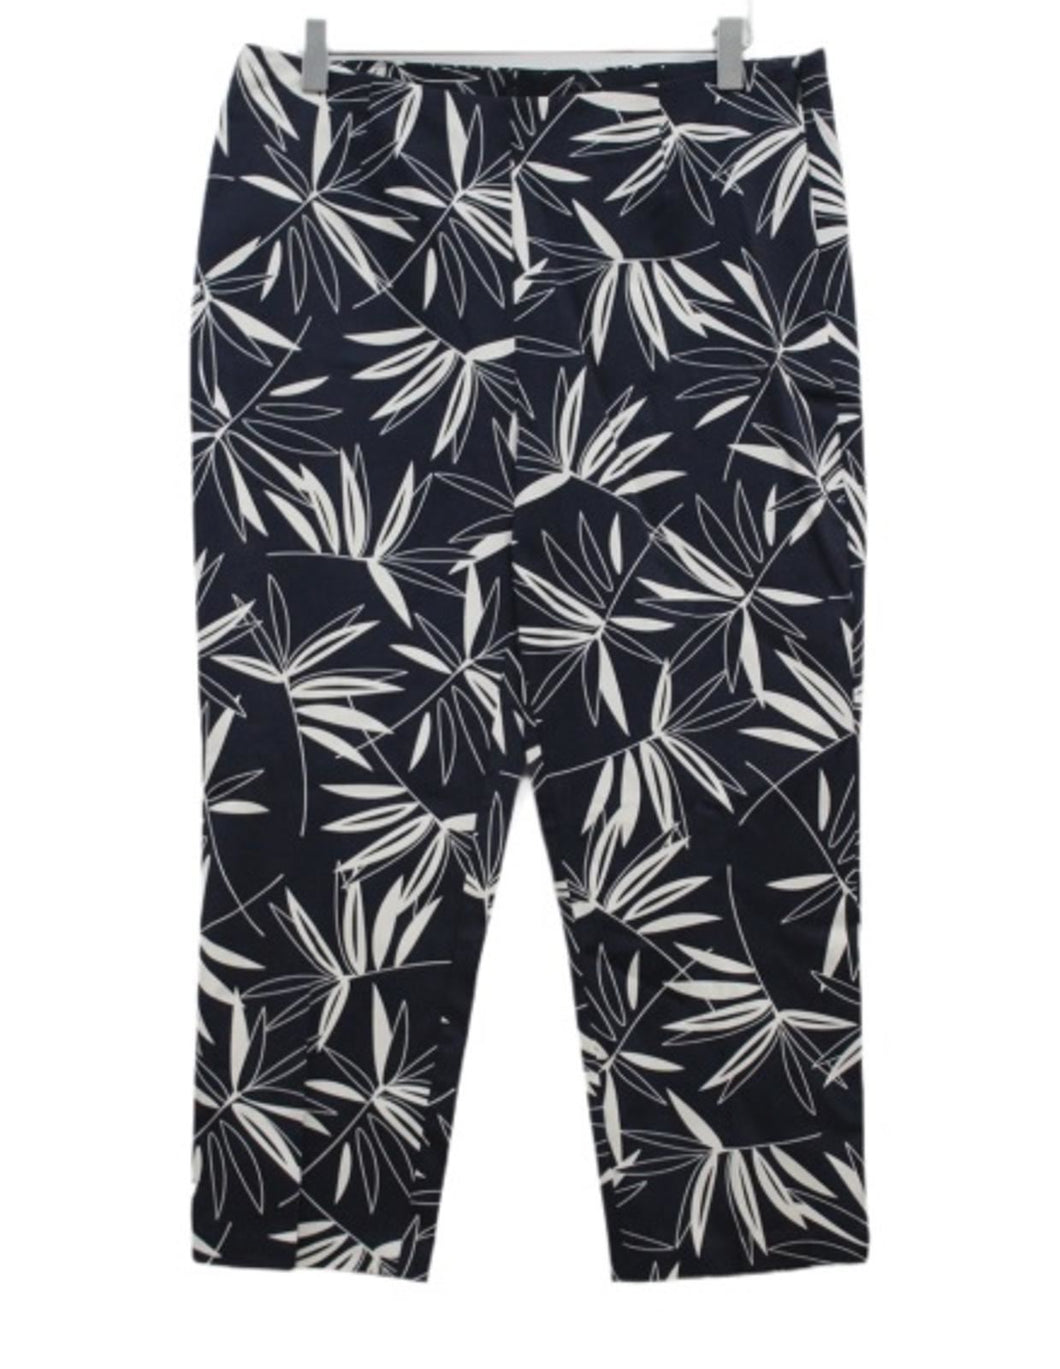 M&S Marks & Spencer Ladies Navy Blue Leaf Print Trousers UK12 RRP22.5 NEW